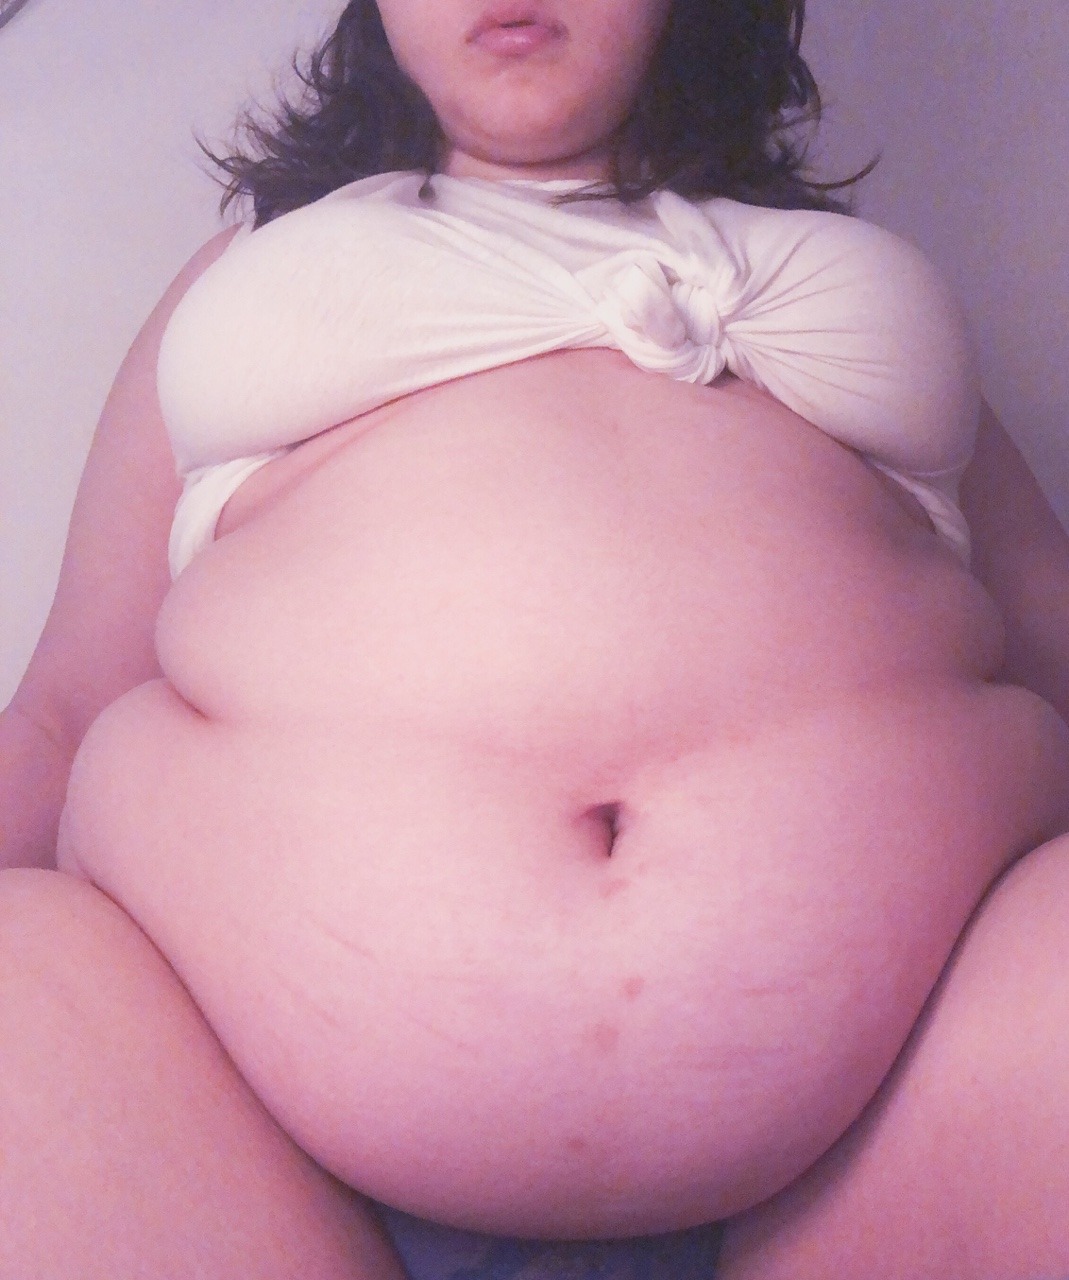 Porn photo chubbychiquita-deactivated20200:💕 look